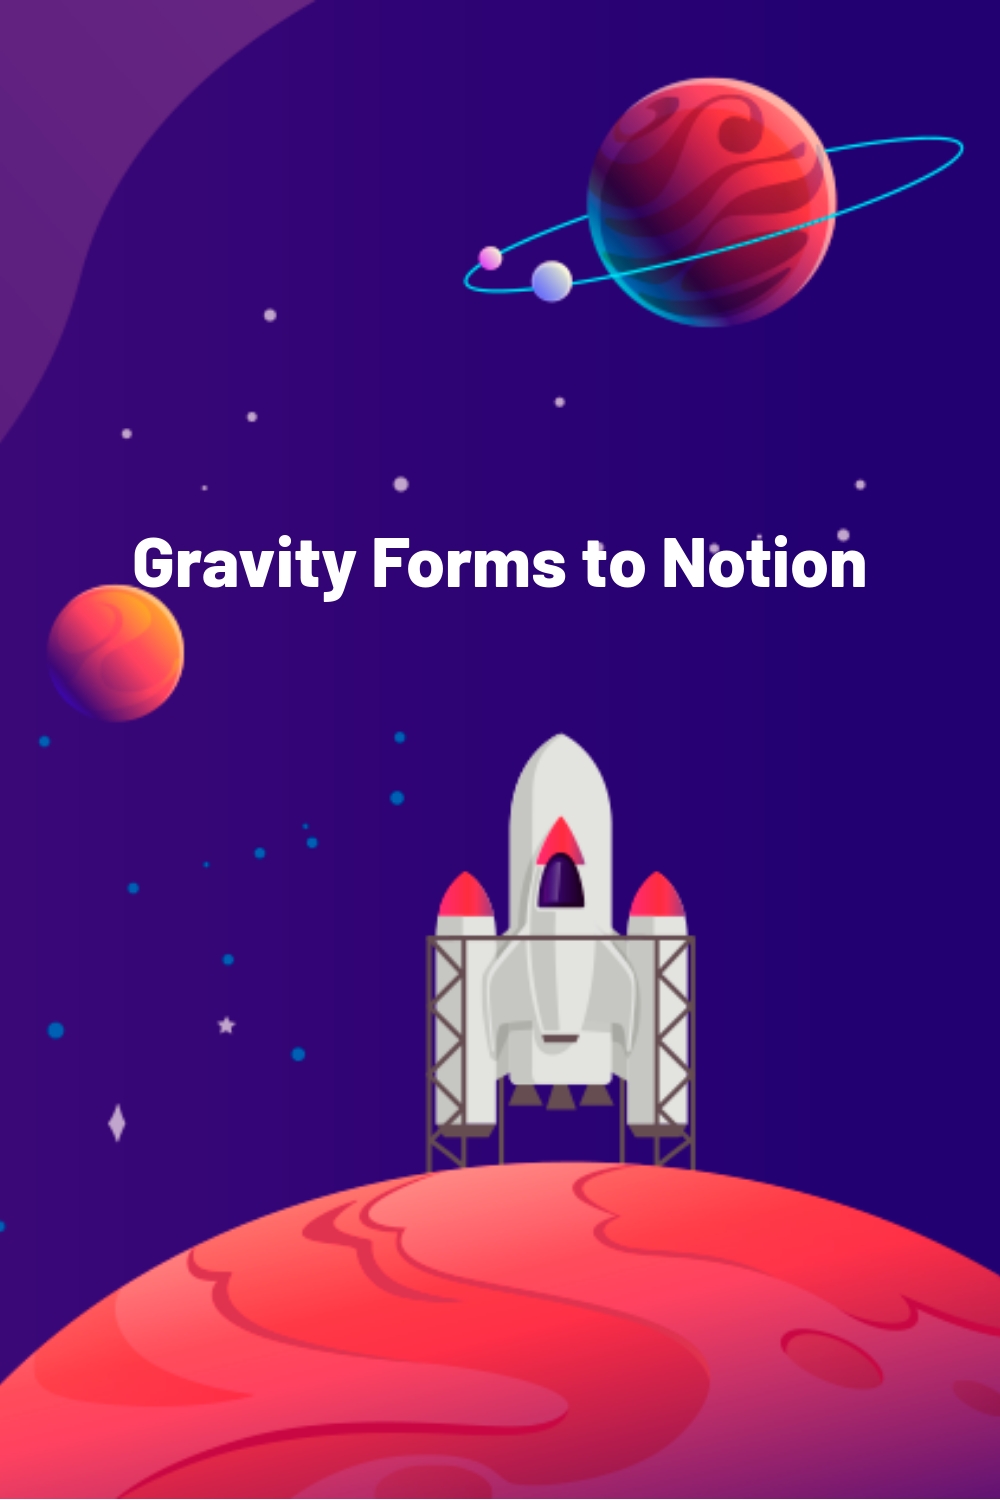 Gravity Forms to Notion